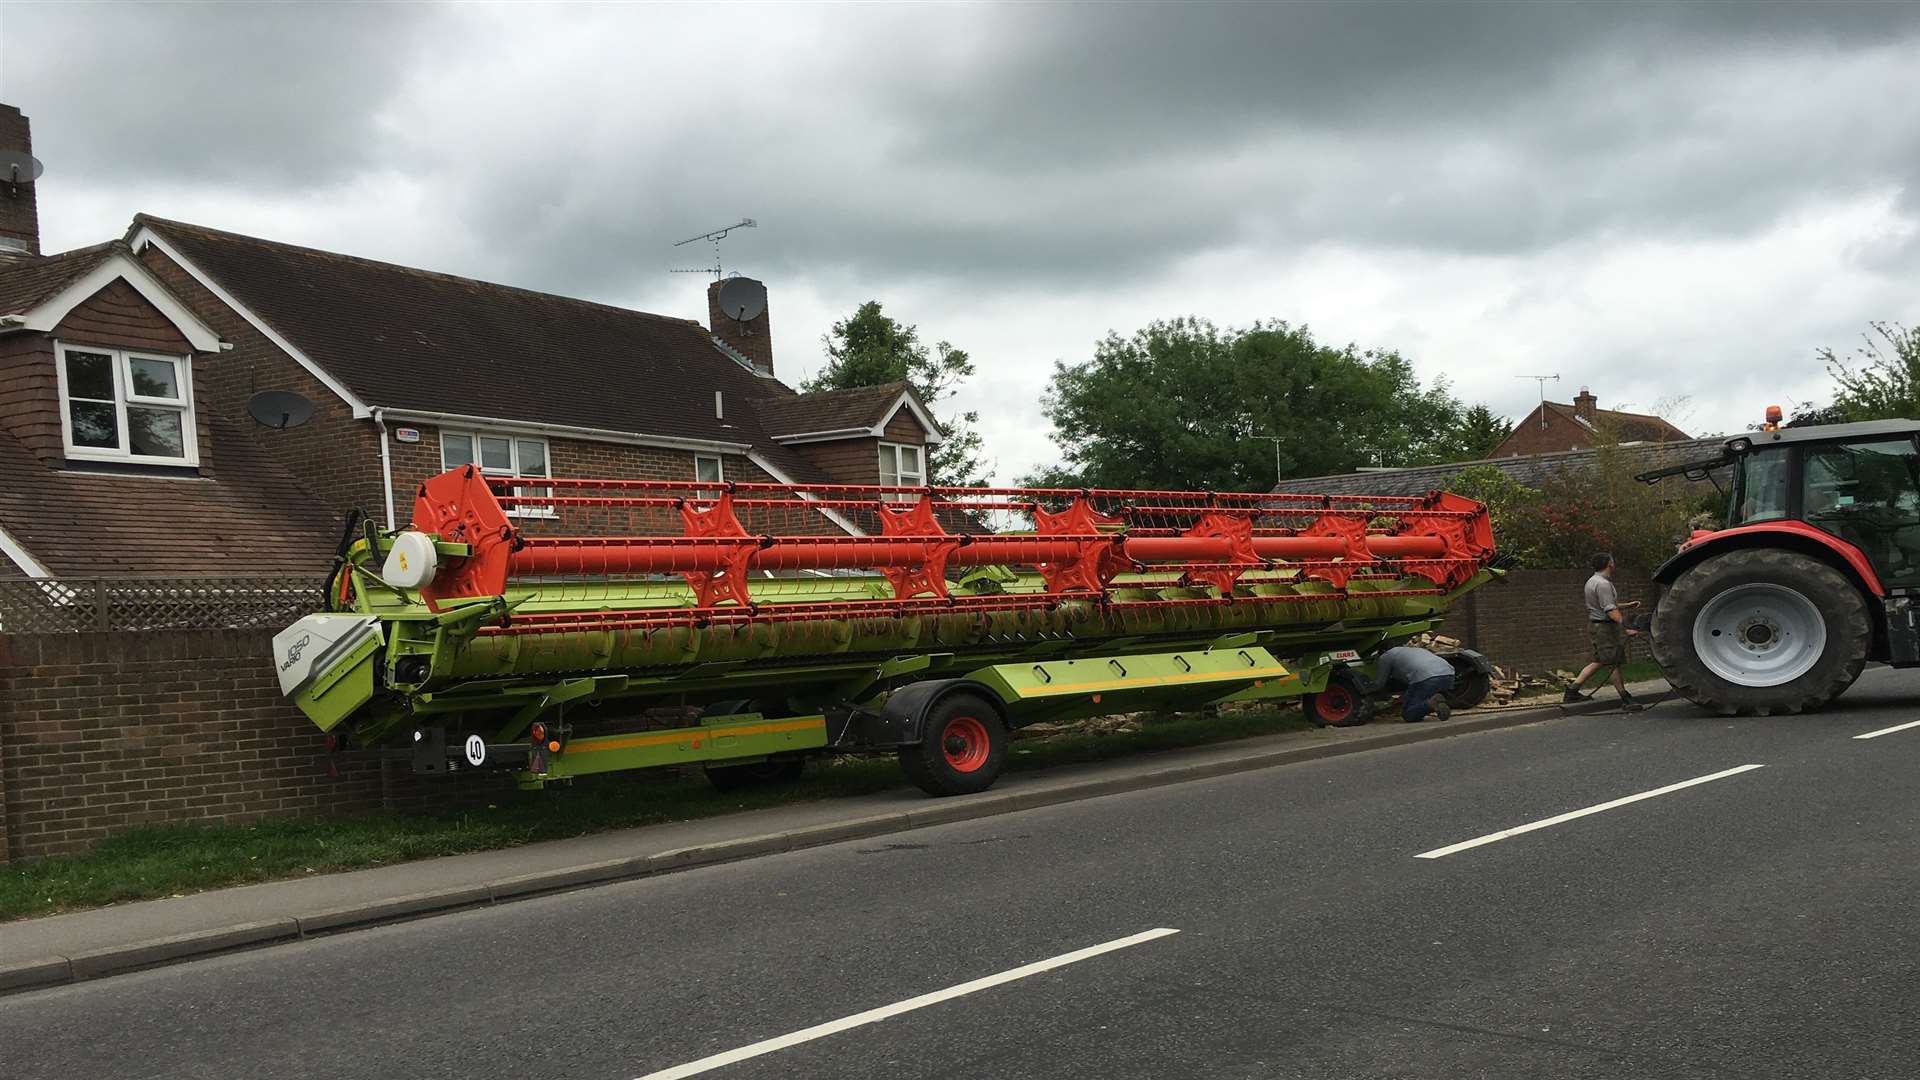 A section of the combine harvester "sheered off"